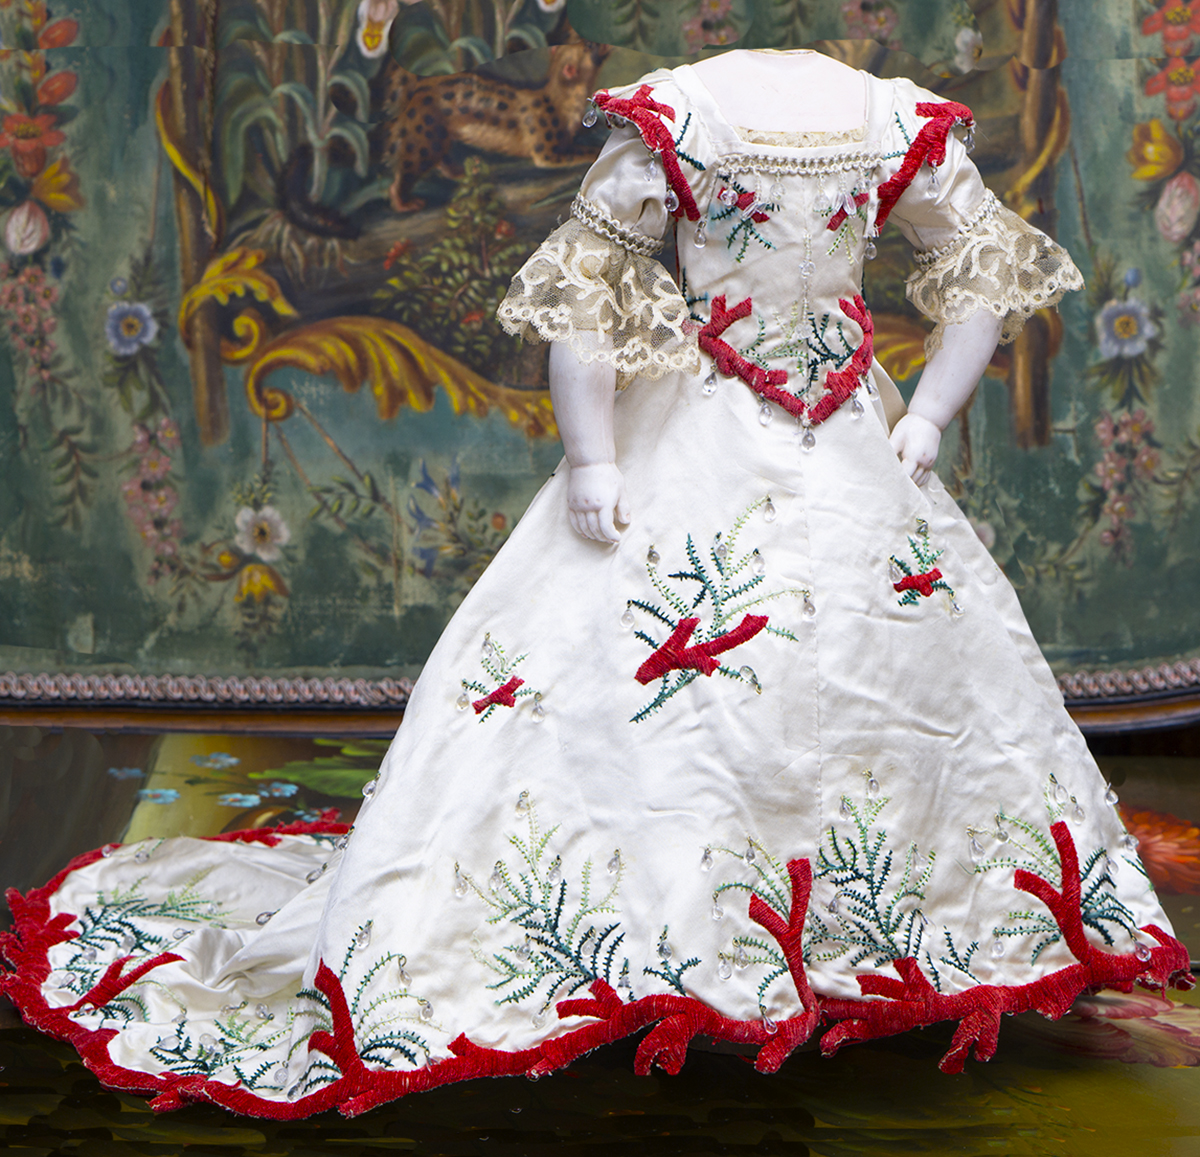 Antique ball gown